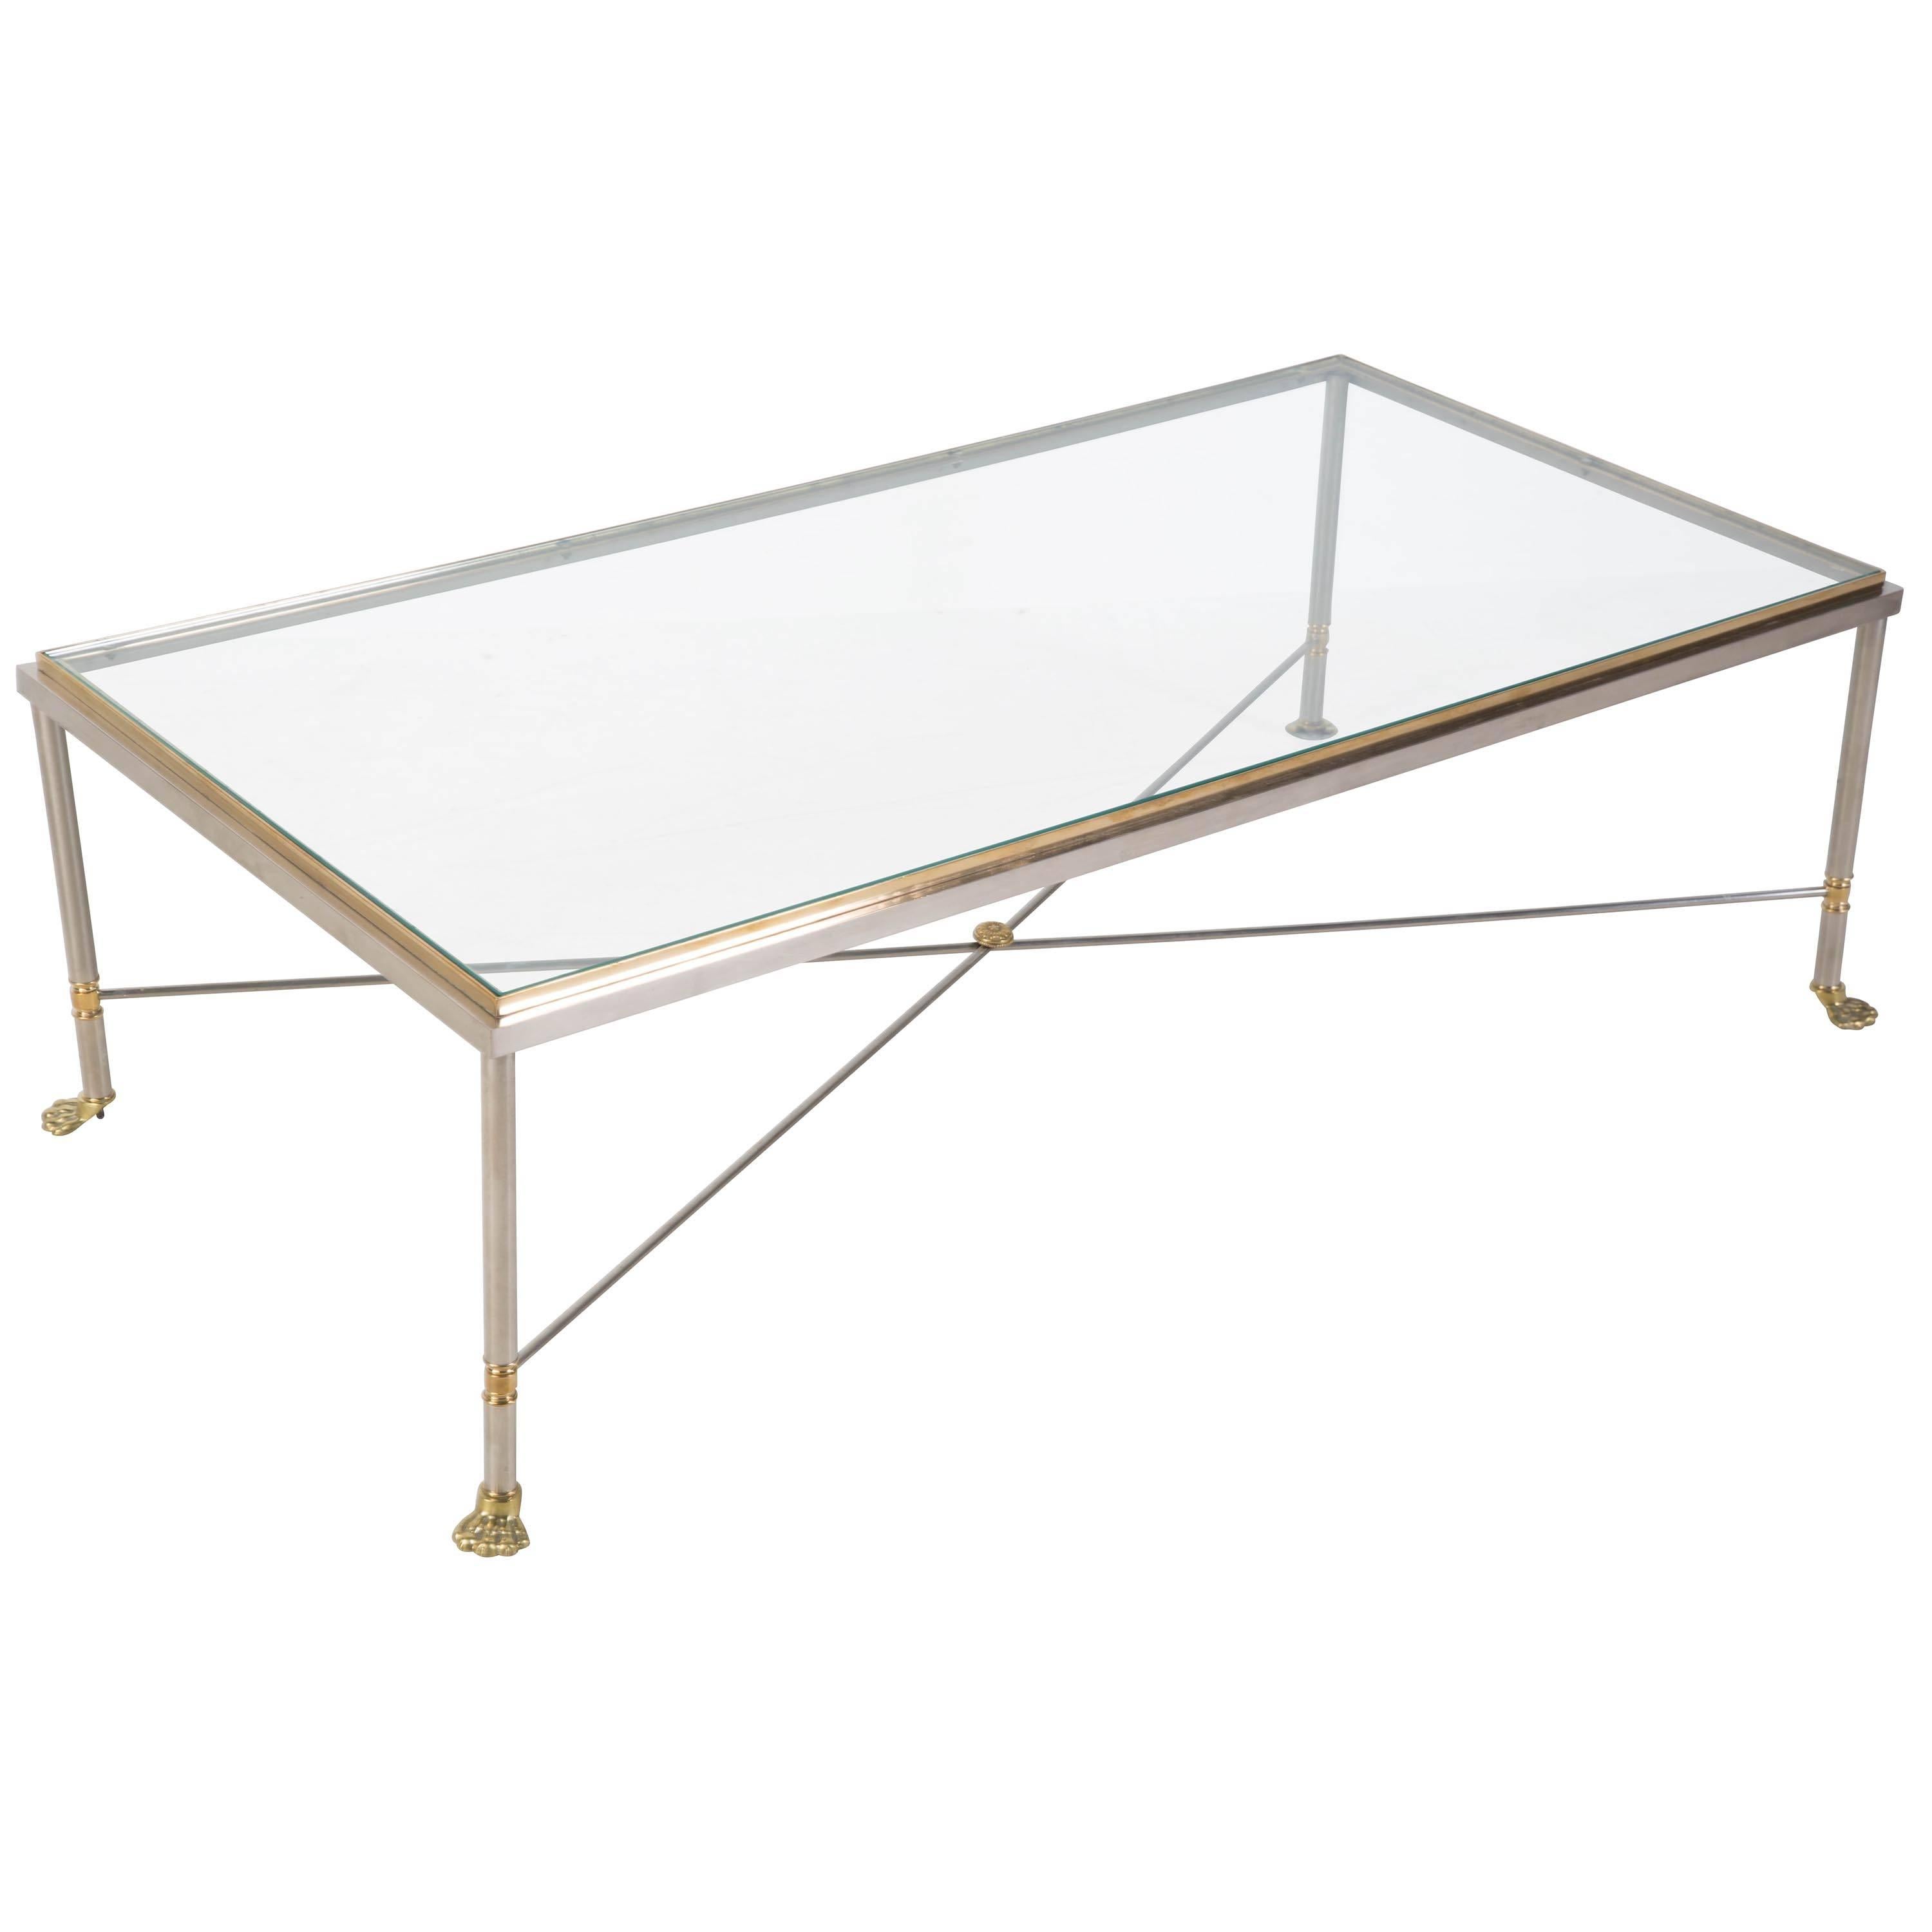 Brushed steel and brass coffee table in the style of Maison Jansen with paw feet